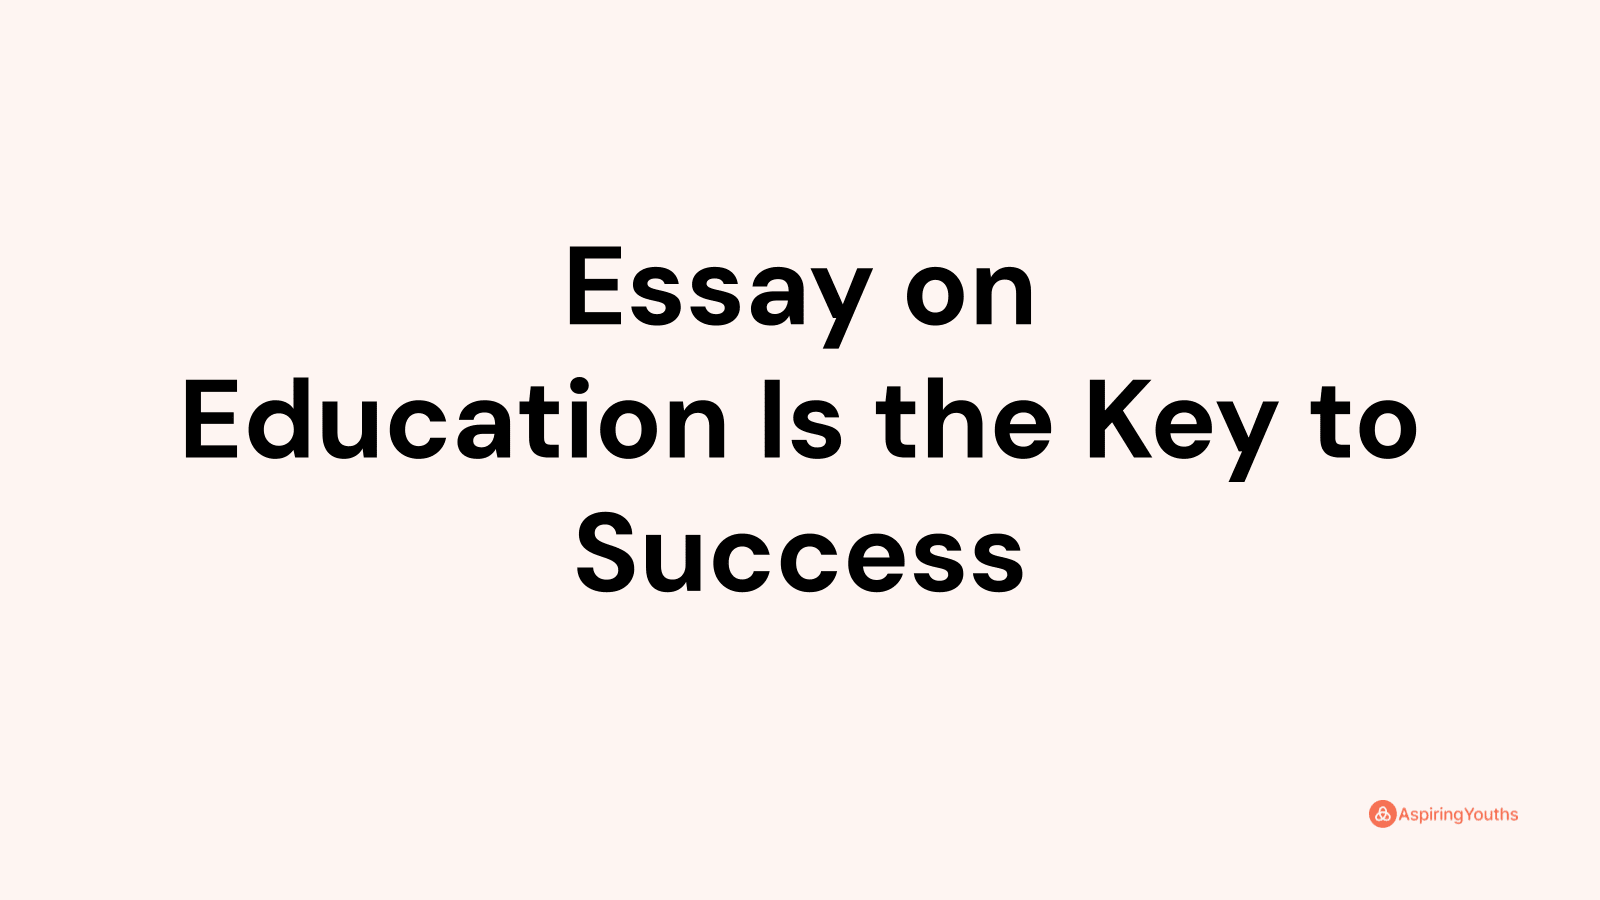 education is the key to success in essay